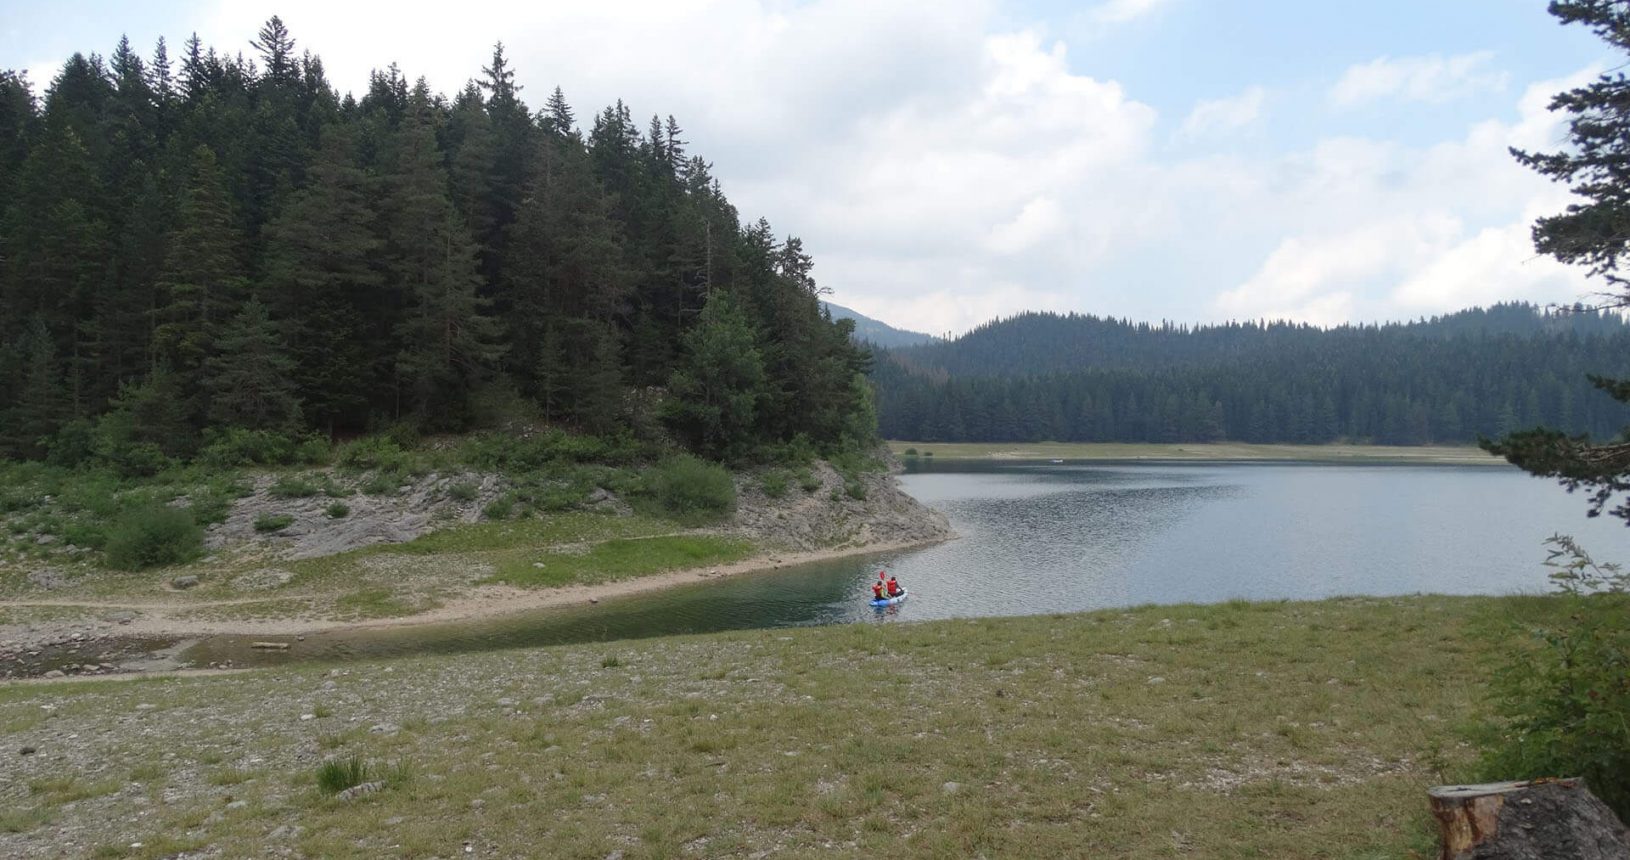 The most beautiful nature in National Park Durmitor